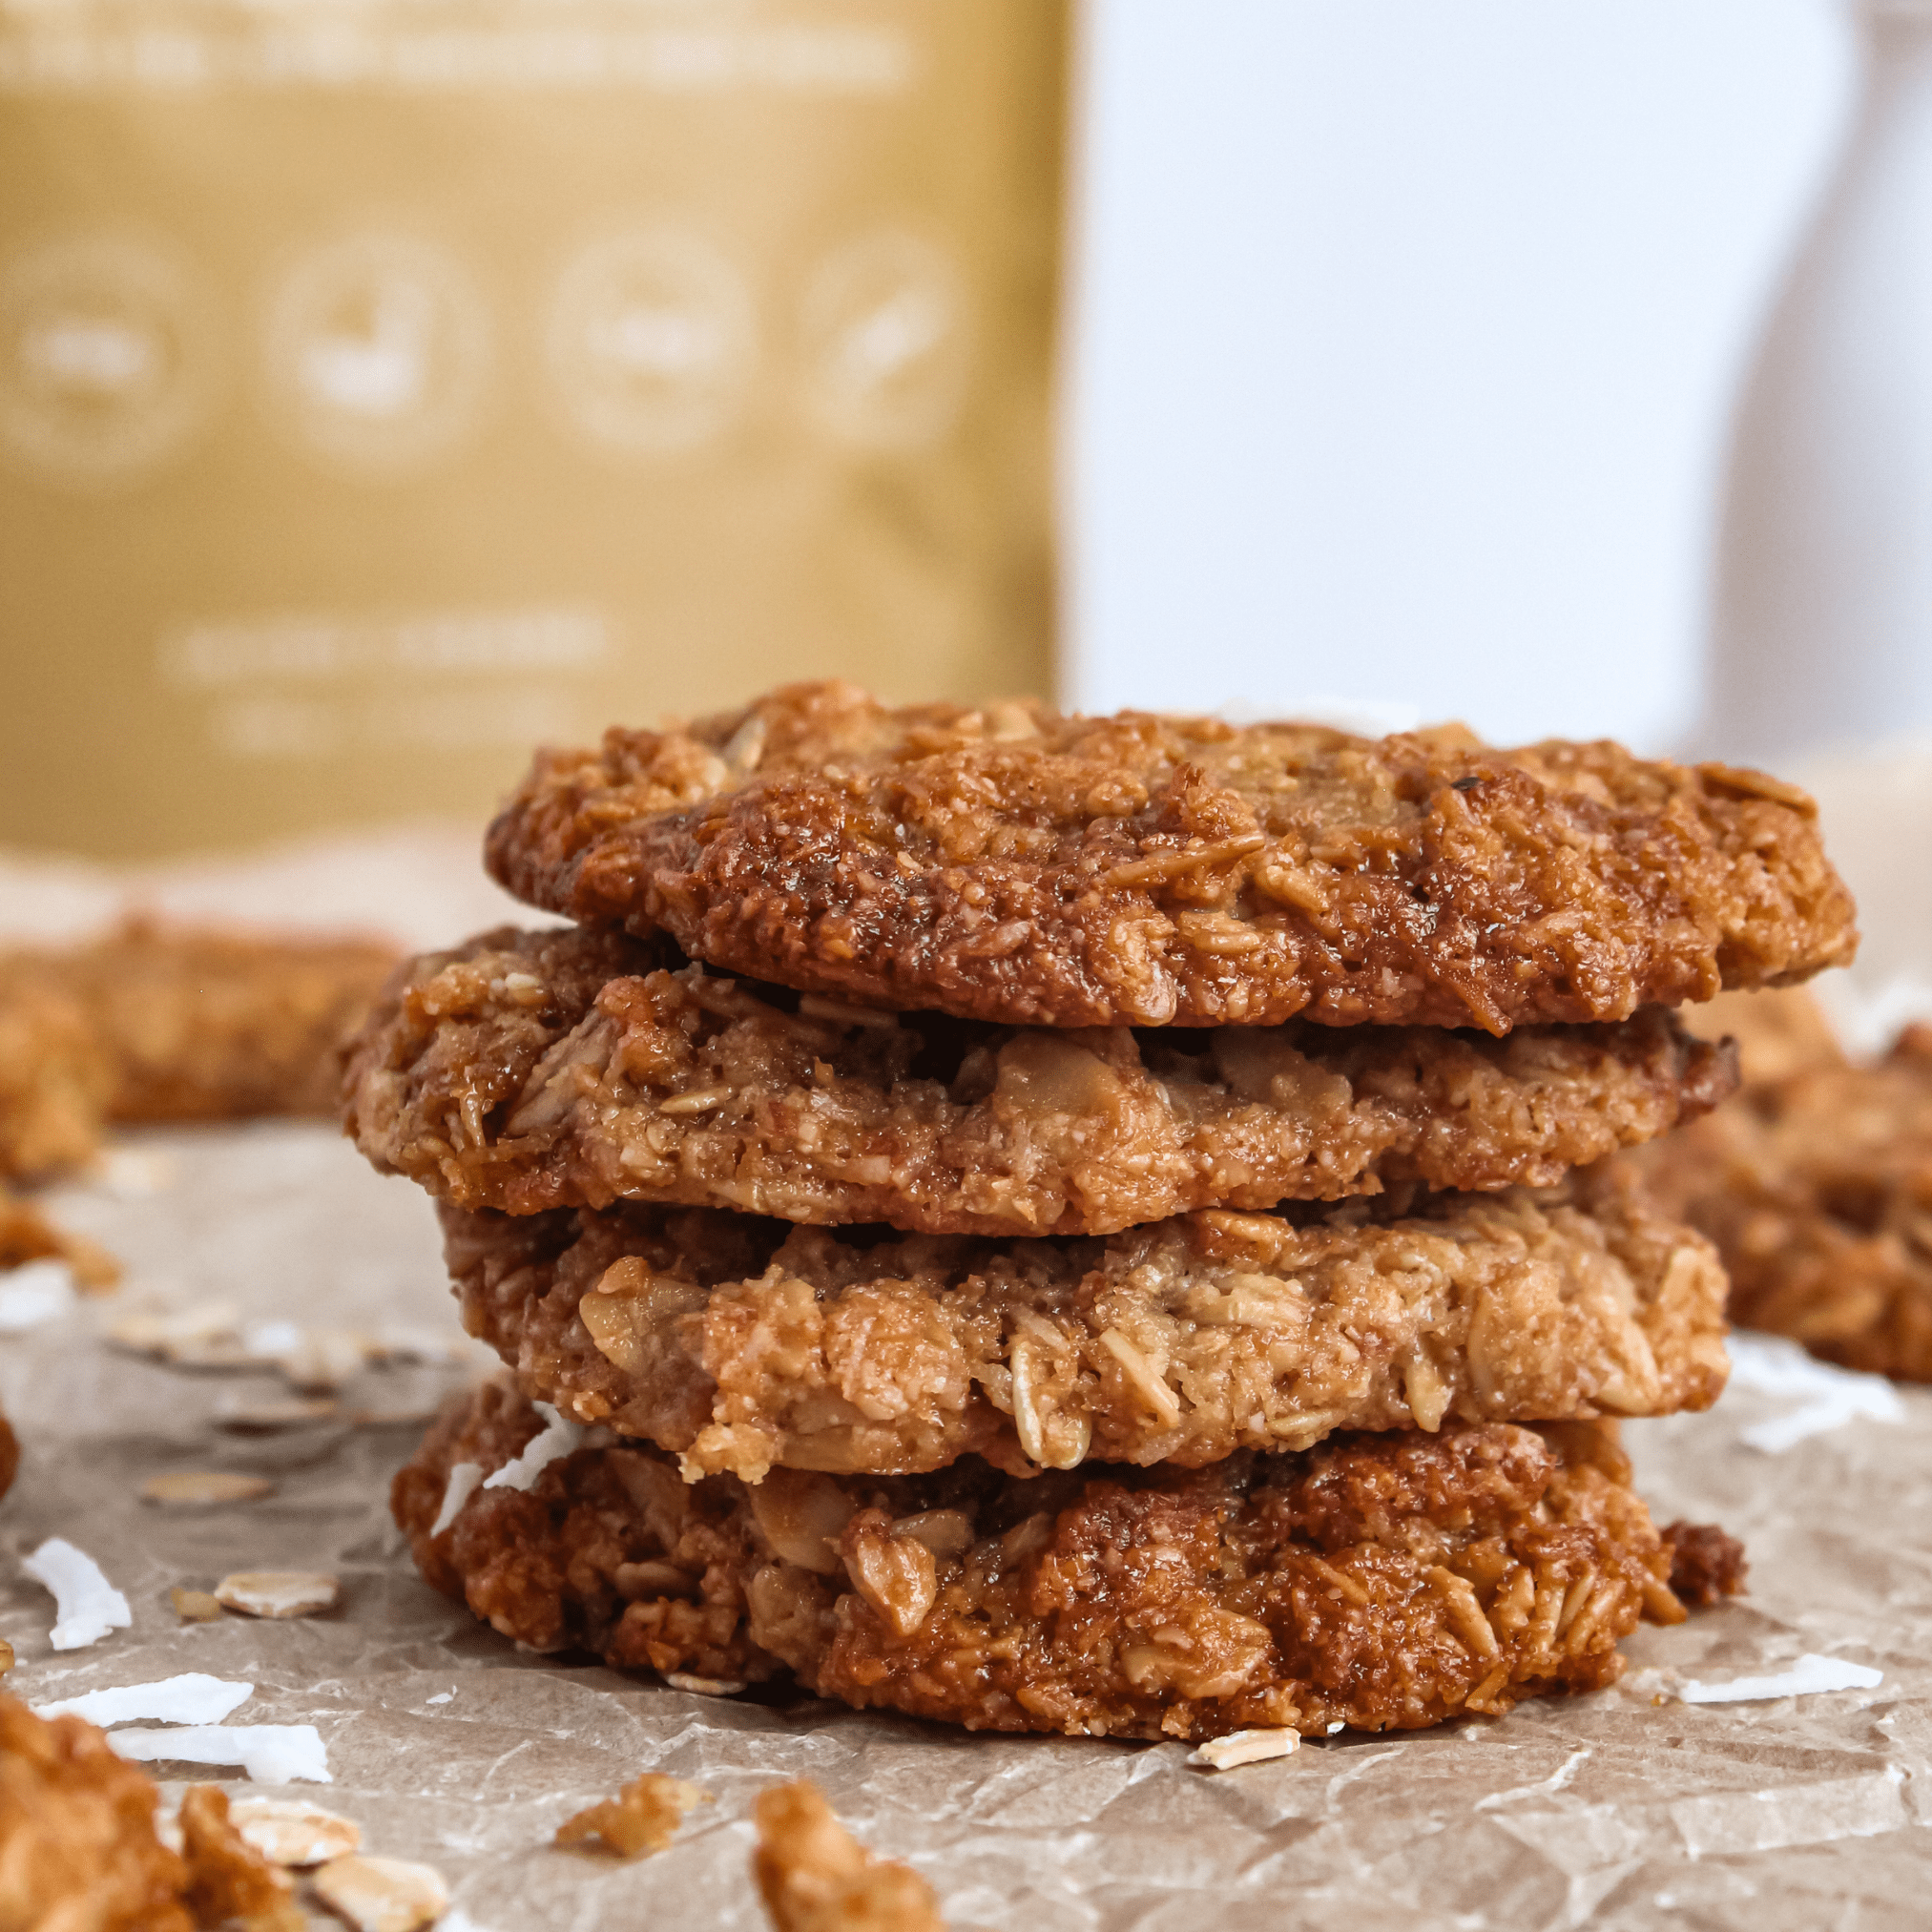 Chewy Anzac Biscuits